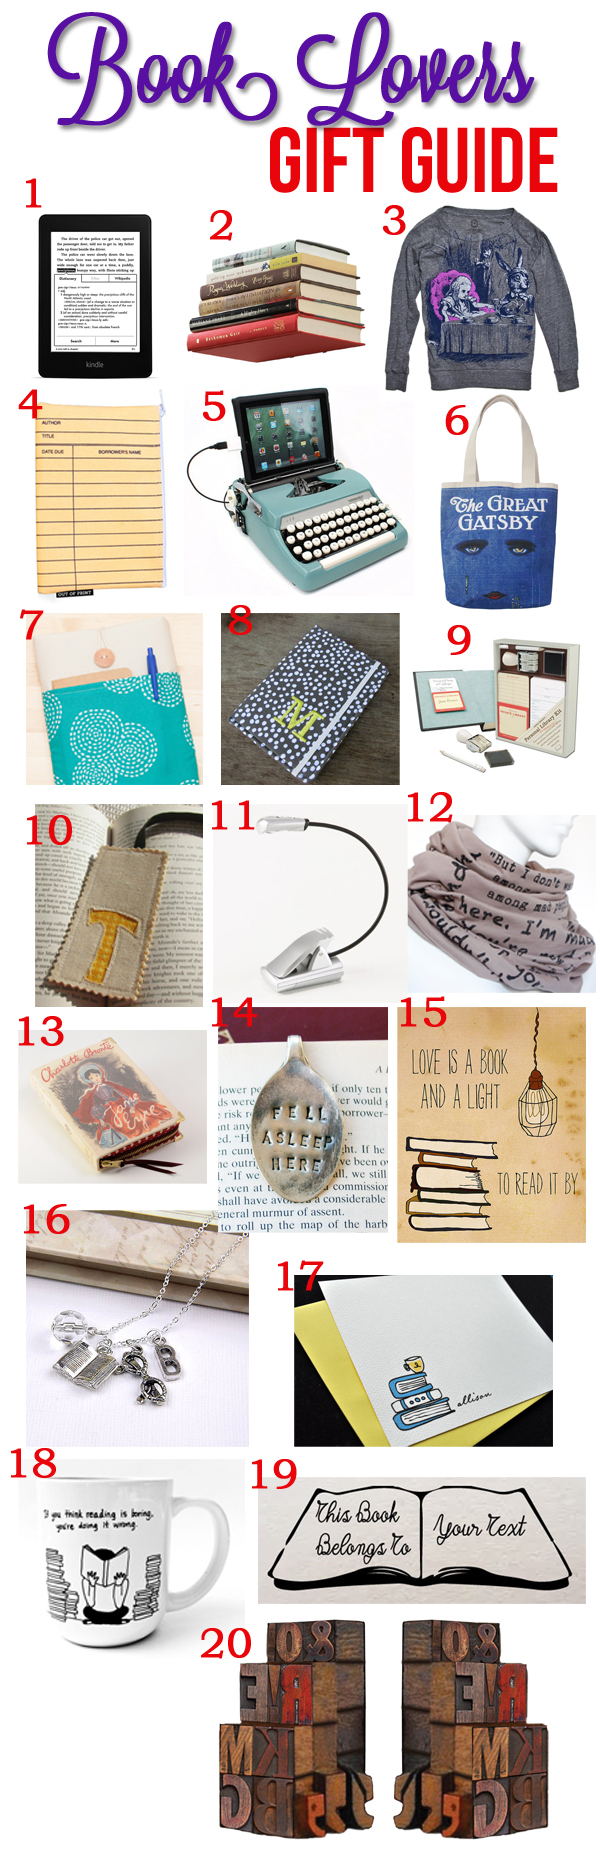 A gift guide for book lovers!